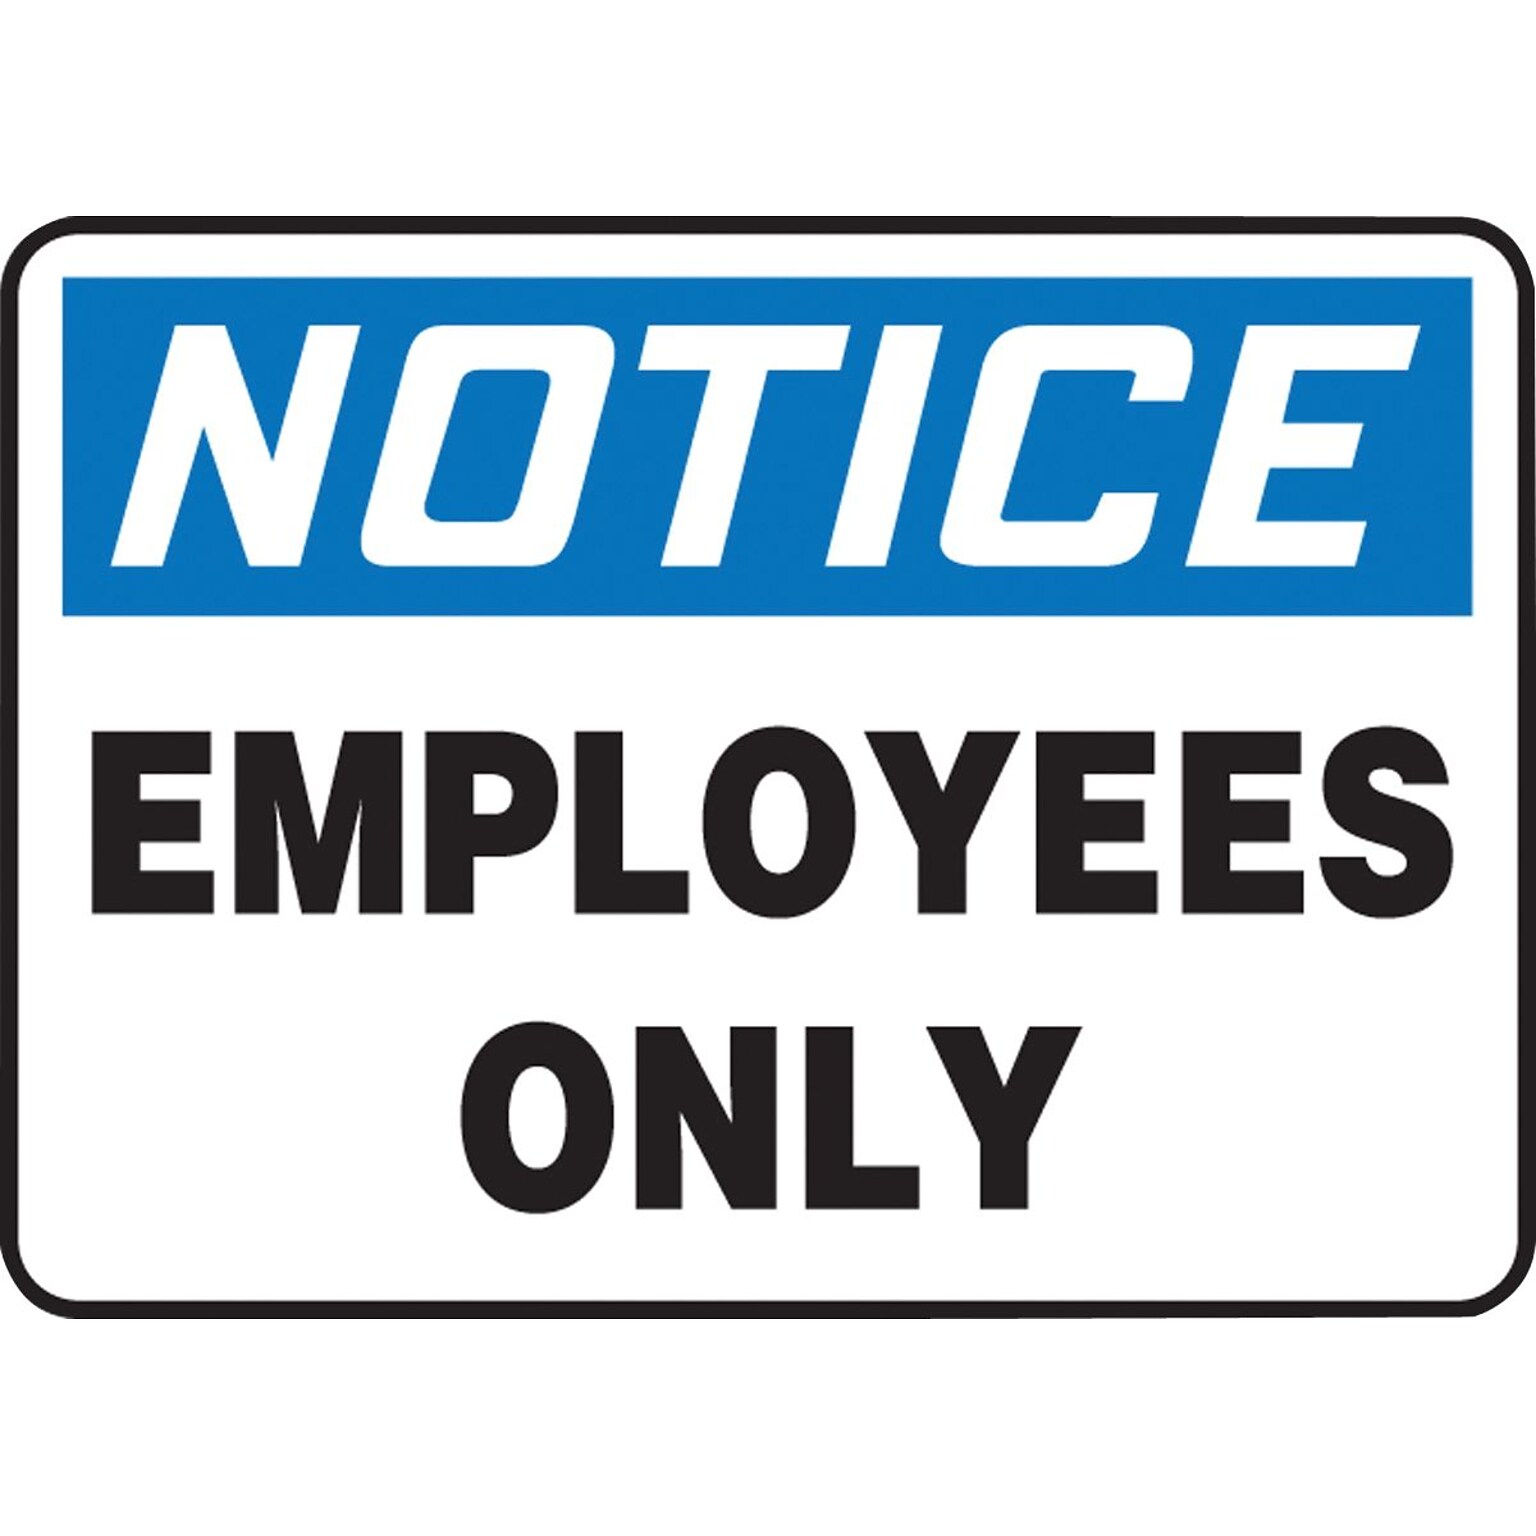 Accuform Safety Sign, NOTICE EMPLOYEES ONLY, 7 x 10, Plastic (MADC803VP)